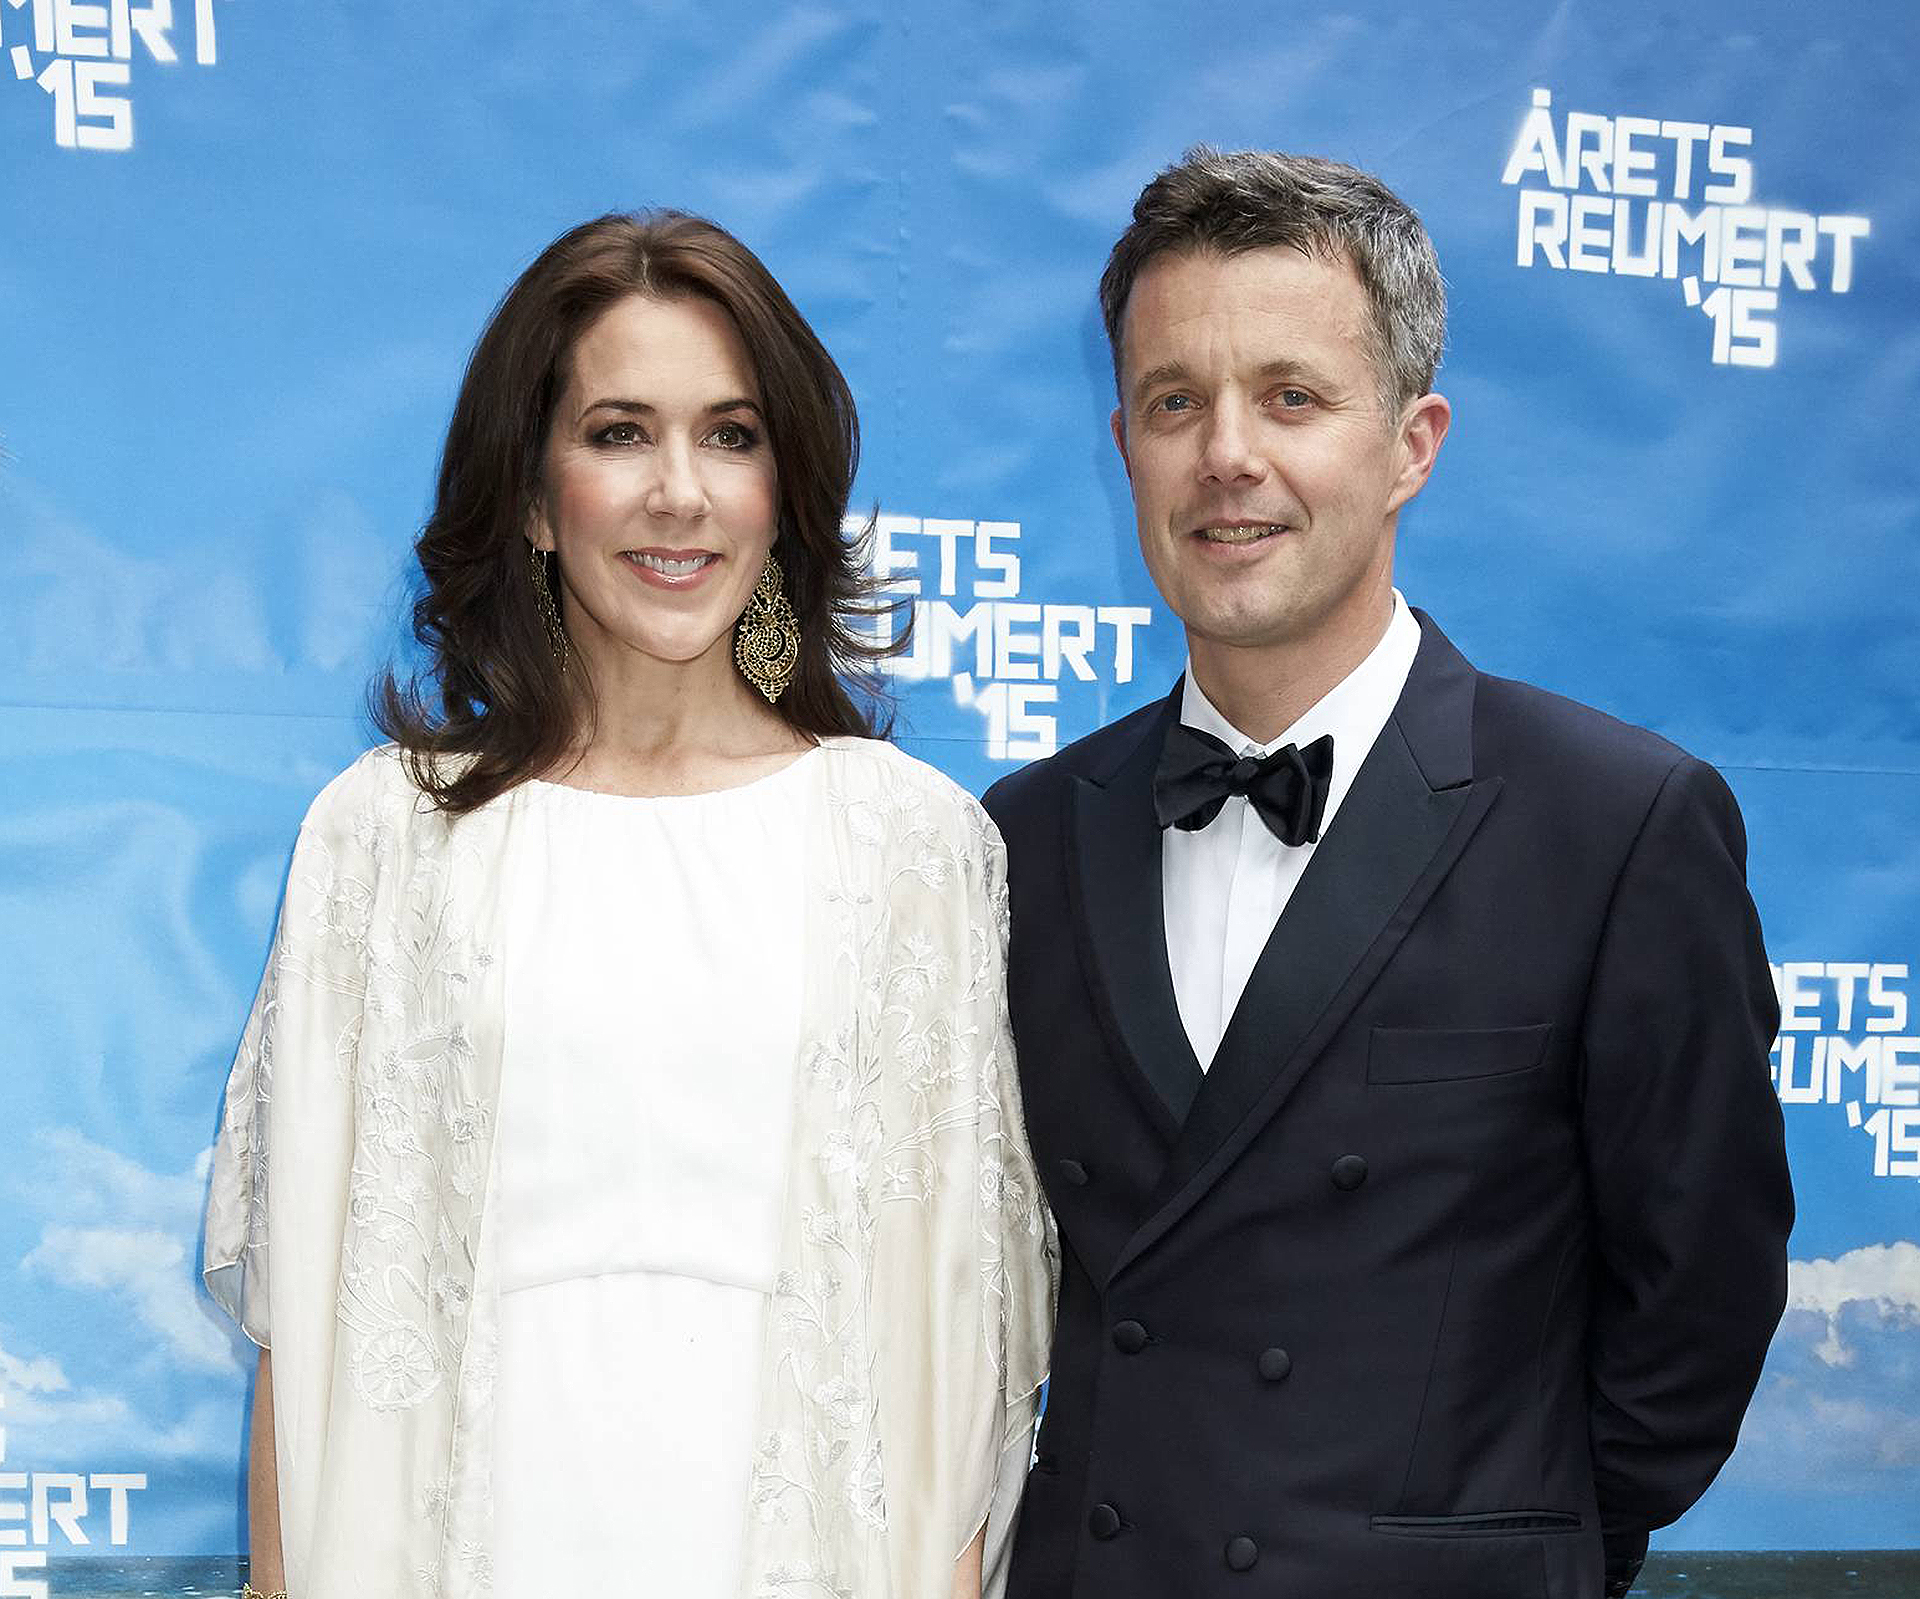 A vision in white: Princess Mary best-dressed again